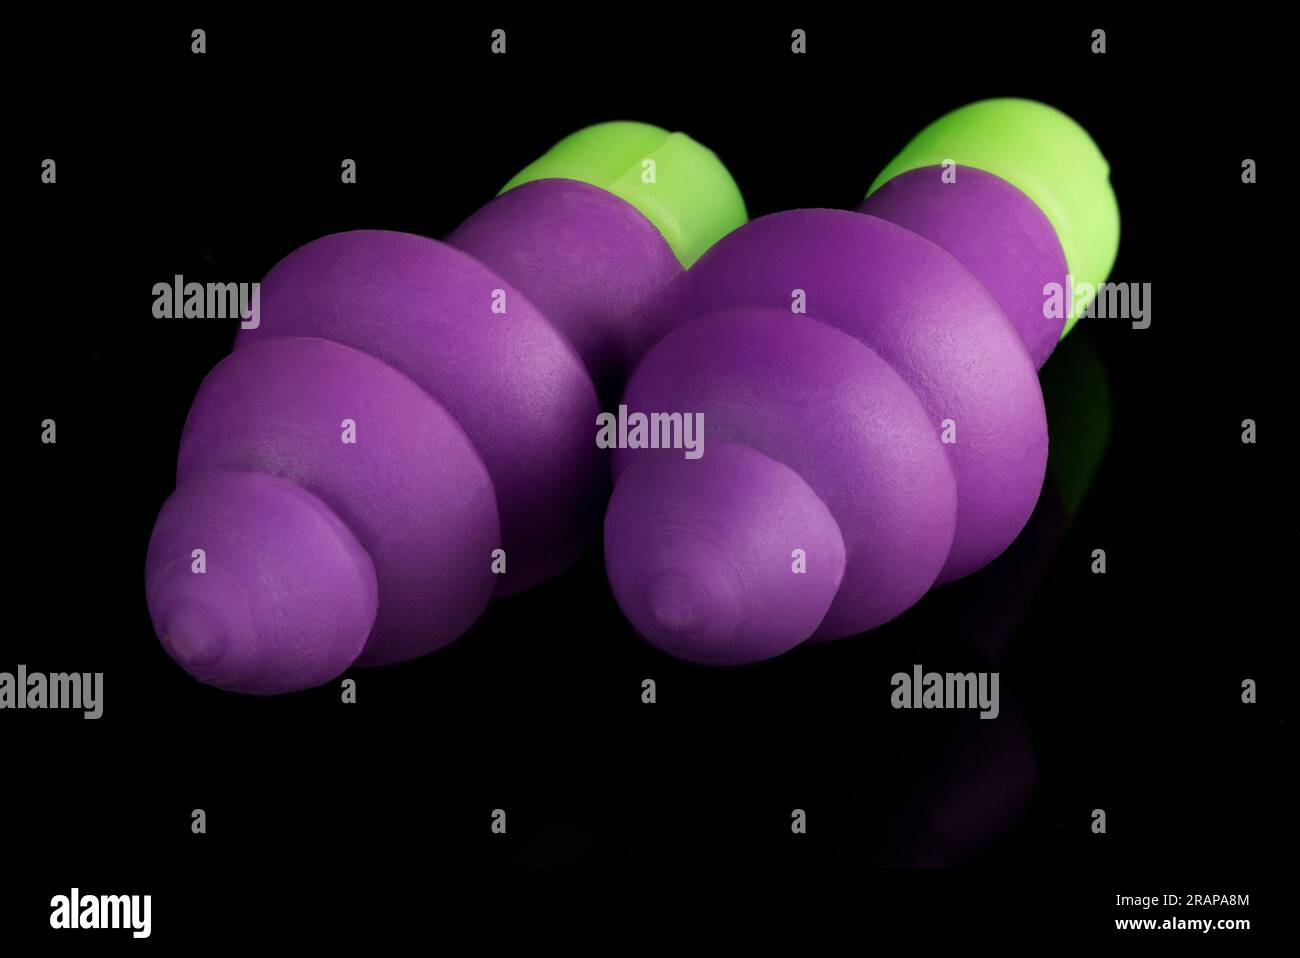 Close up of purple and green ear plugs Stock Photo